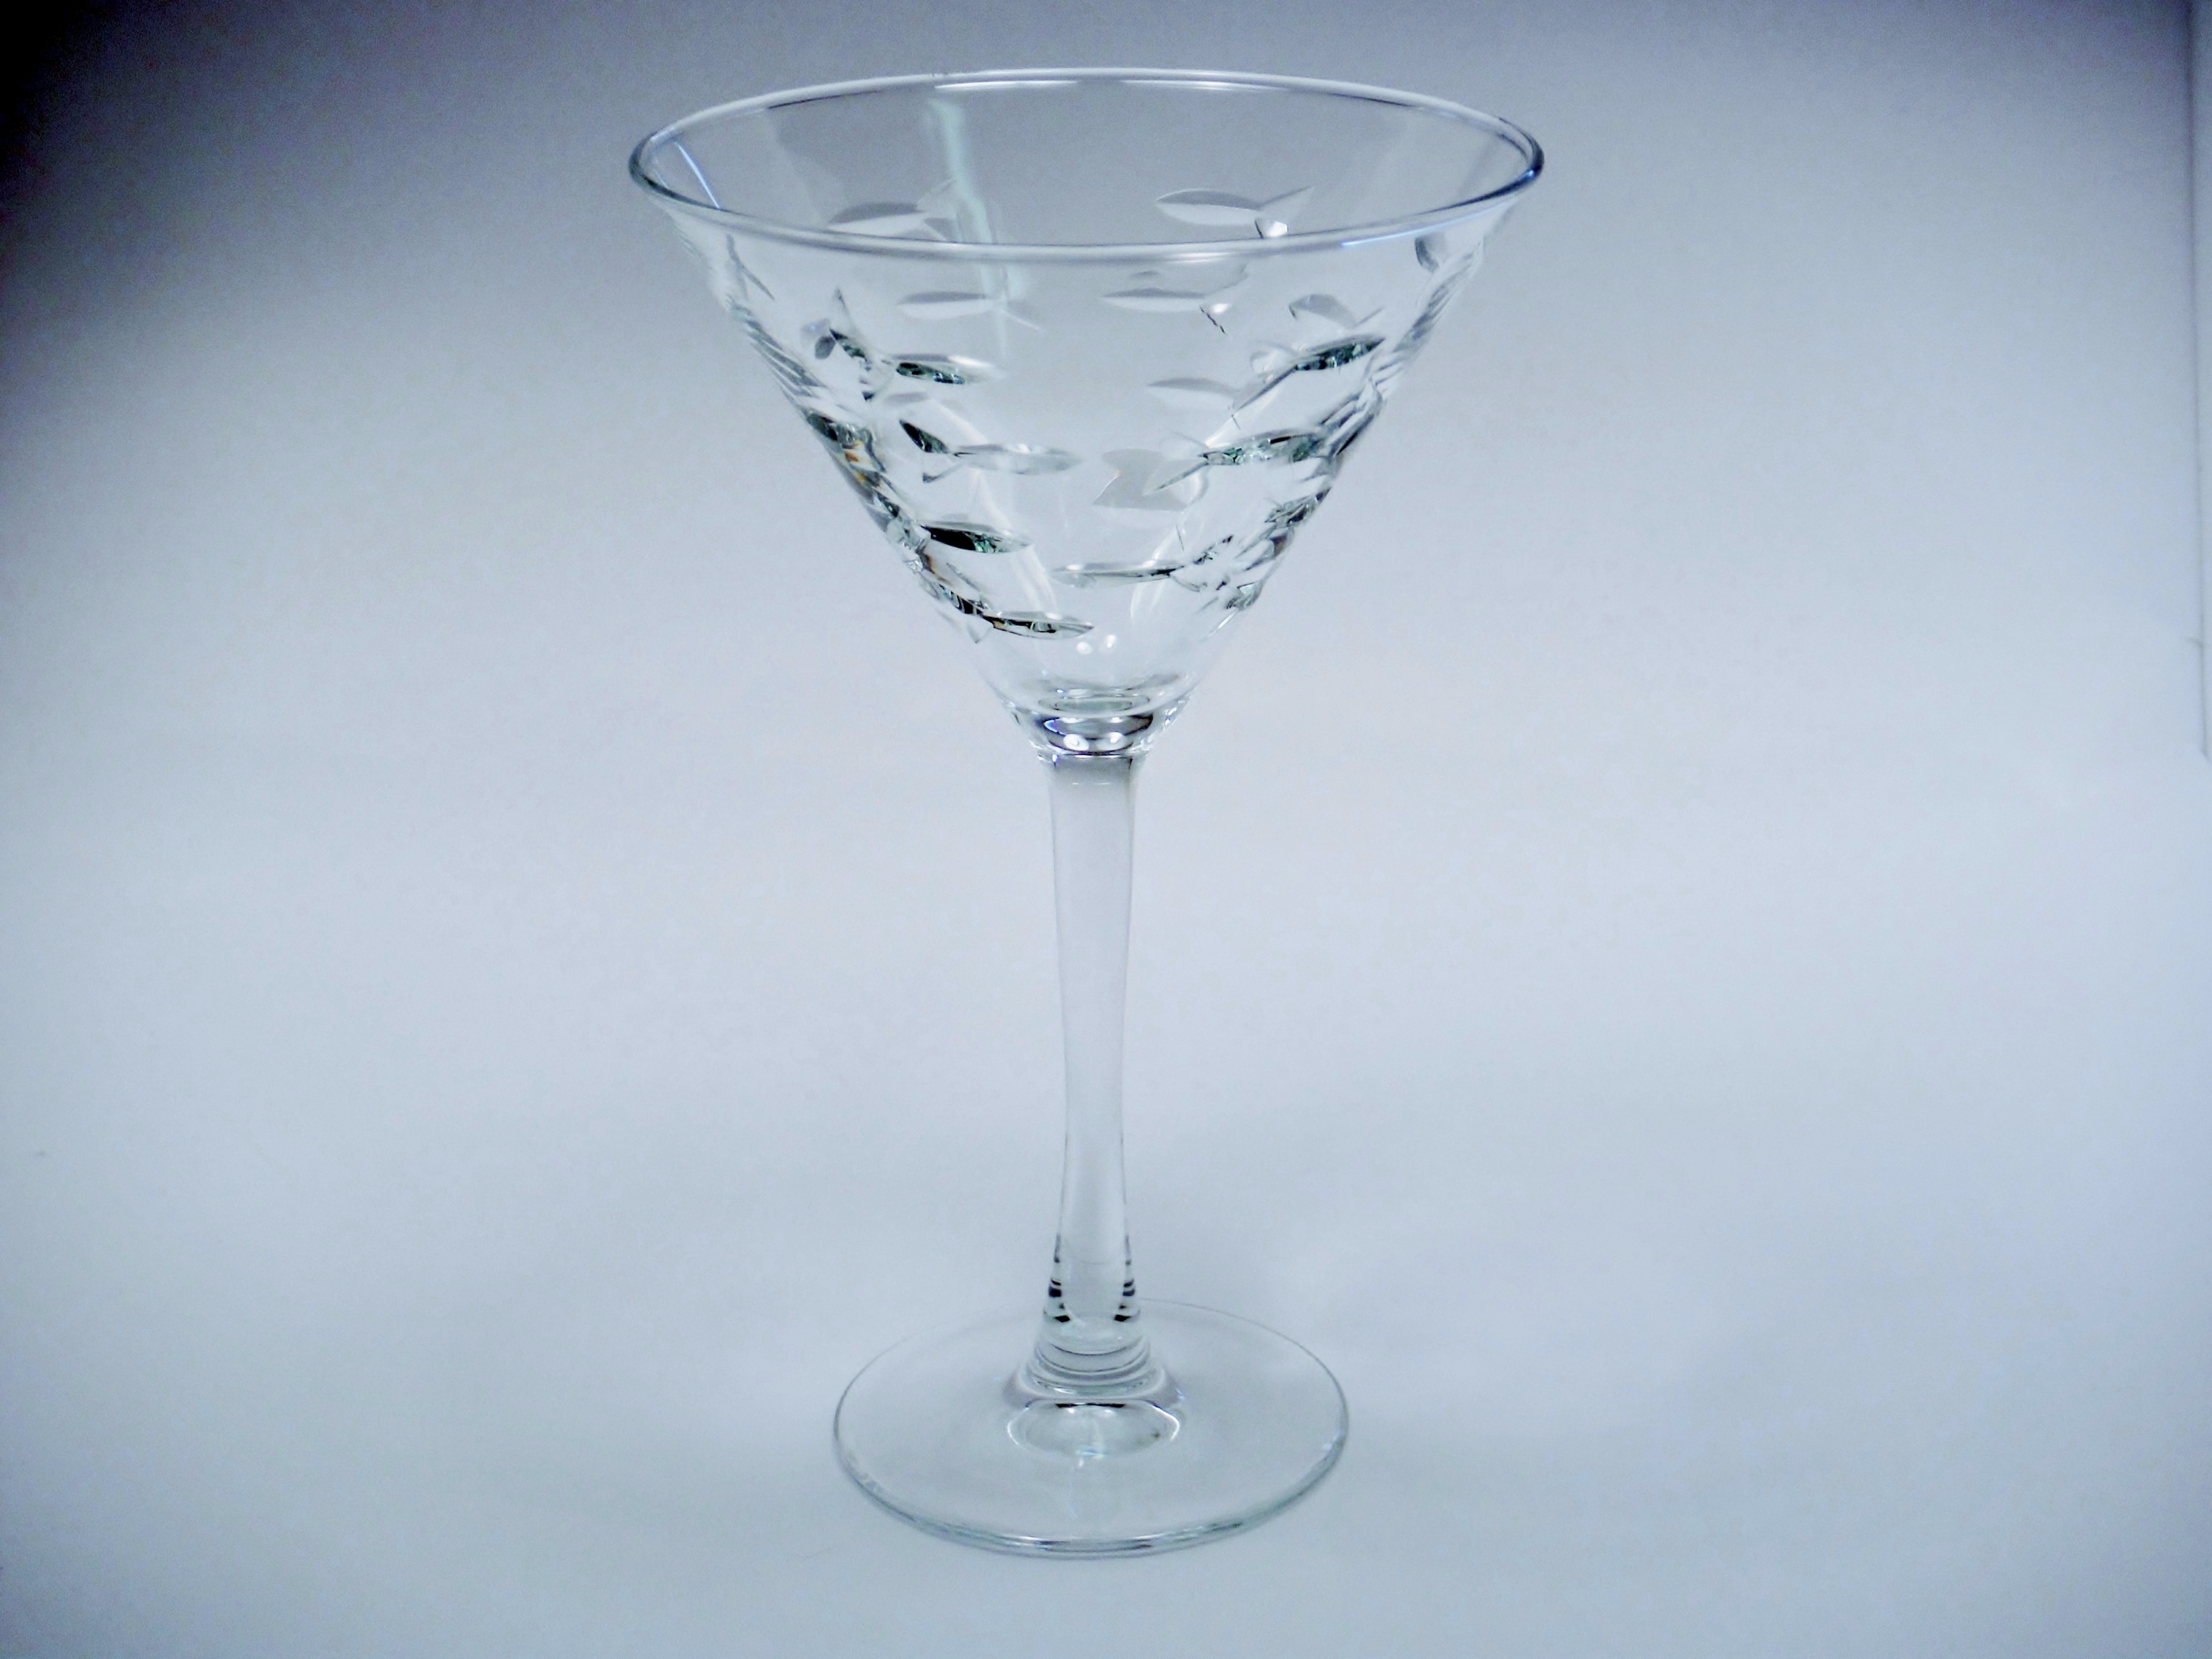 School of Fish Martini Glasses 10 oz. made in USA by Rolf Glass